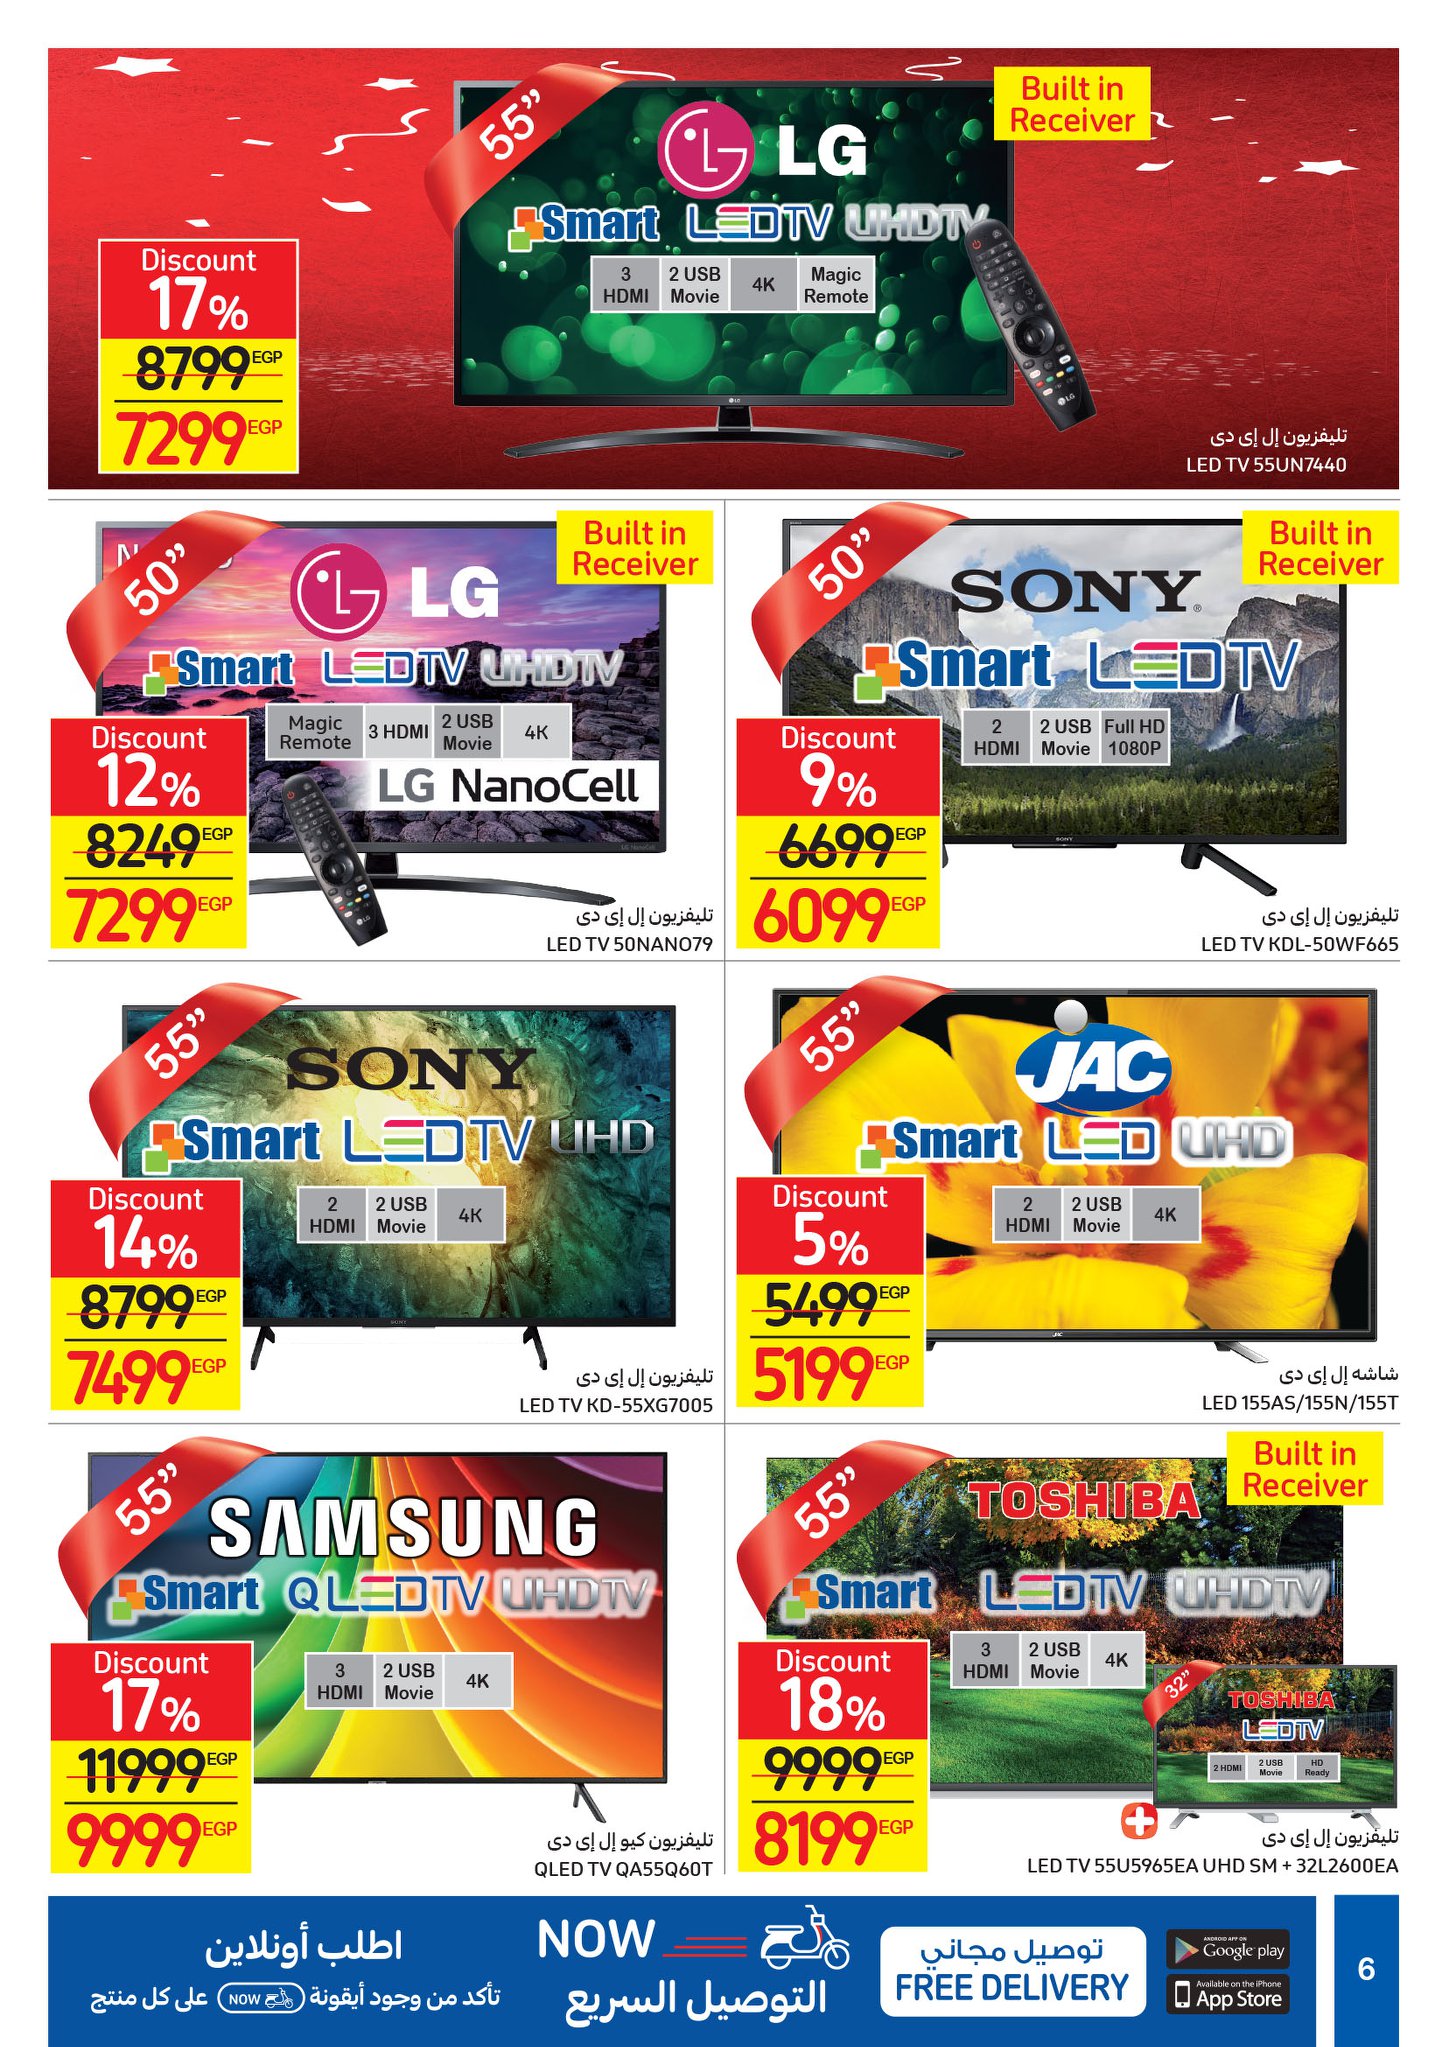 Carrefour New Year 2021 birthday offers in full catalog 5